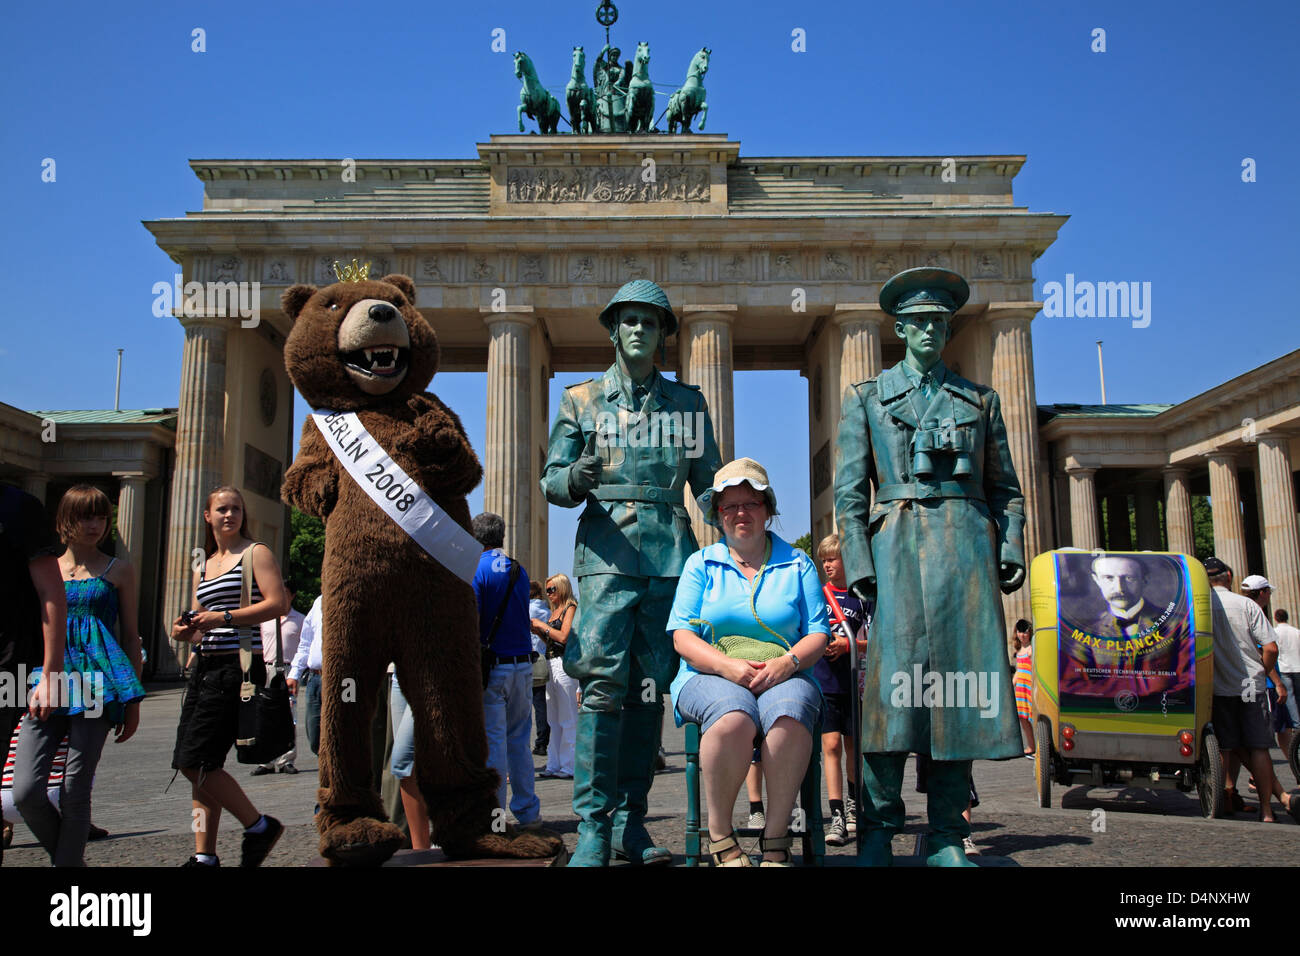 Street performer dressed as Soldiers posing for tourists in front of Brandenburg Gate, Berlin, Germany Stock Photo